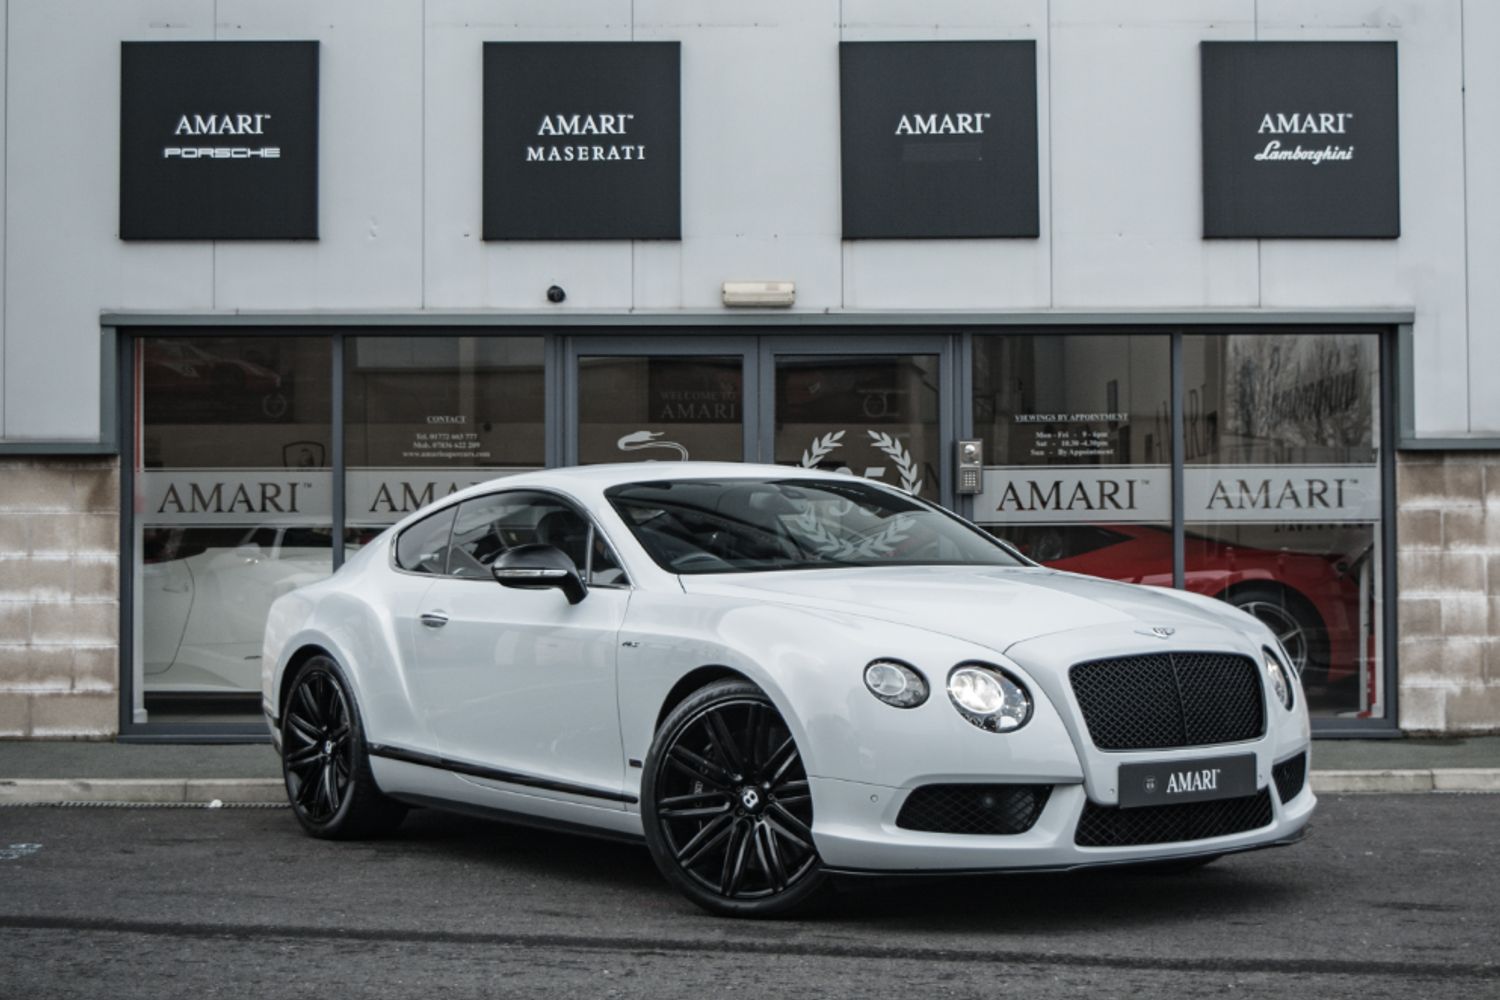 BENTLEY CONTINENTAL COUPE 4.0 GT V8 S 2DR AUTOMATIC